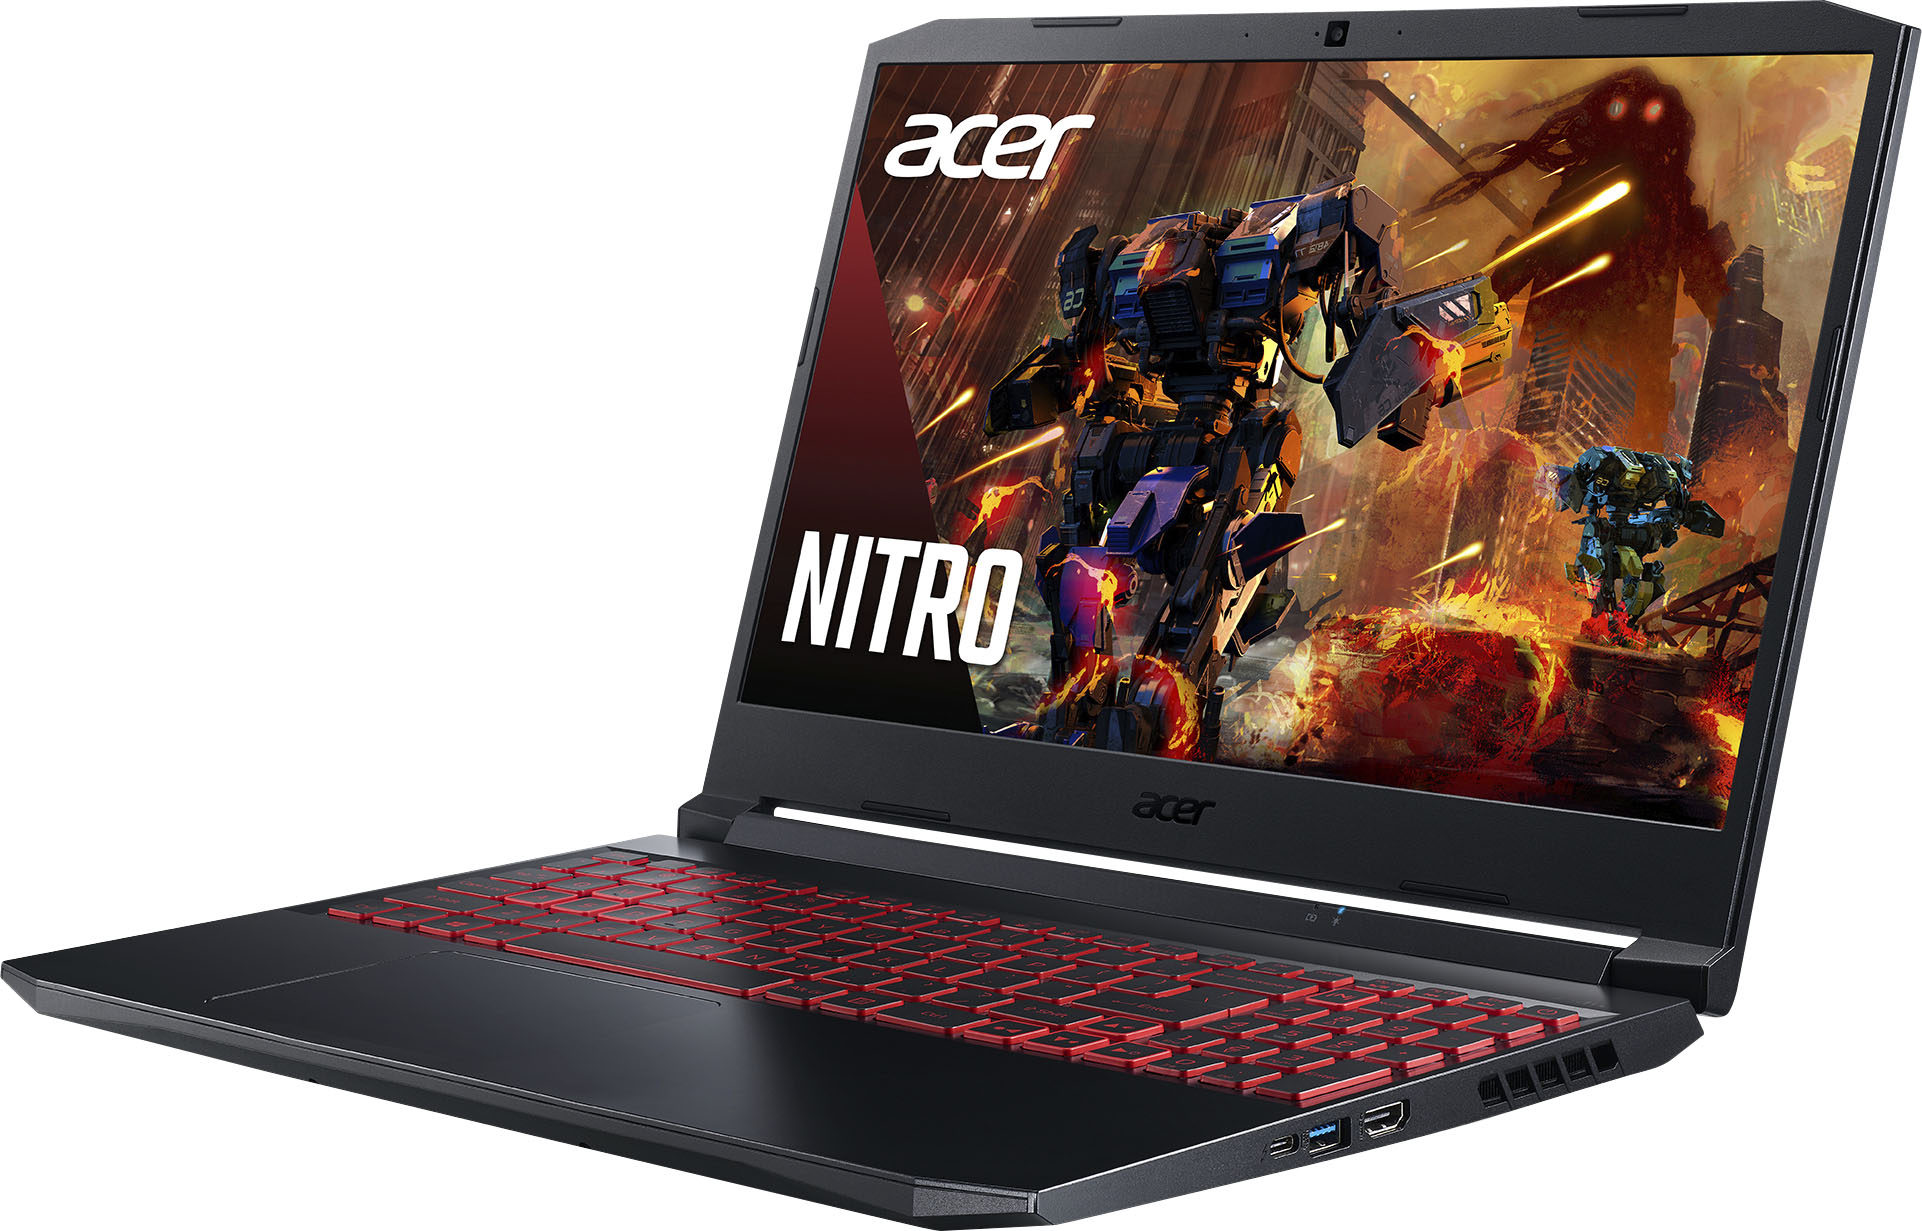 Questions and Answers: Acer Nitro 5 – Gaming Laptop 15.6" FHD 144Hz